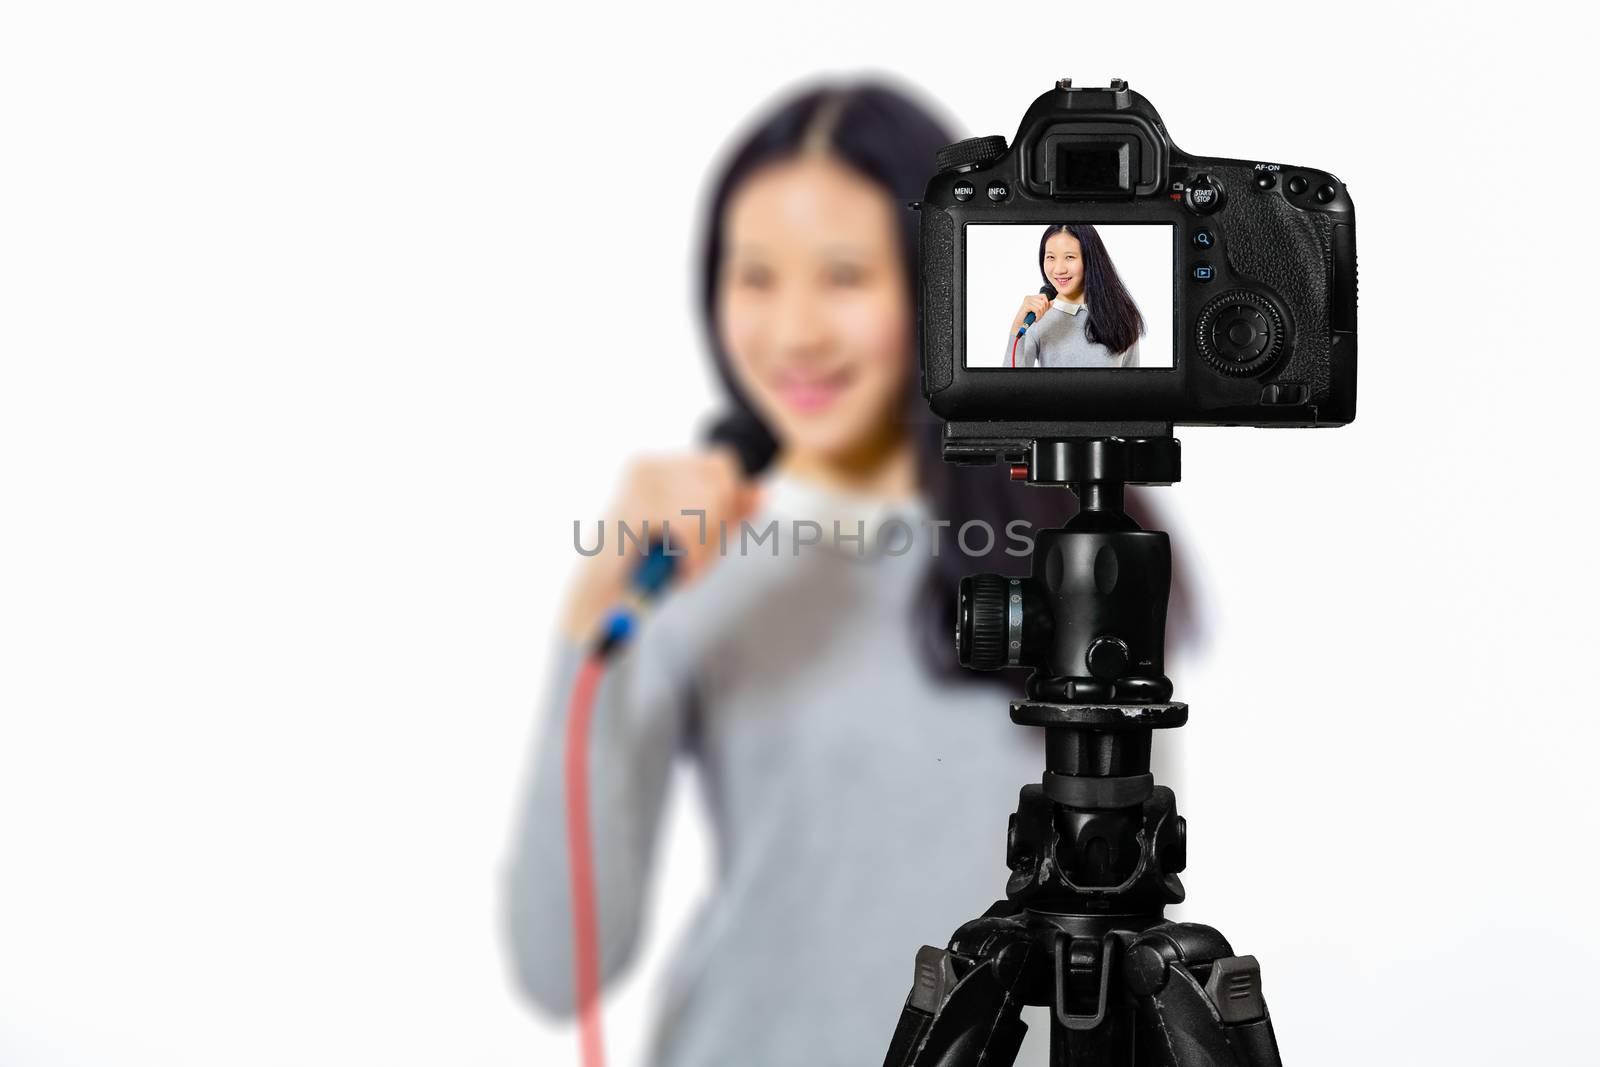 Focus on live view on camera on tripod, teenage girl  singing with microphone image on back screen with blurred scene in background. Teenage vlogger livestreaming show concept